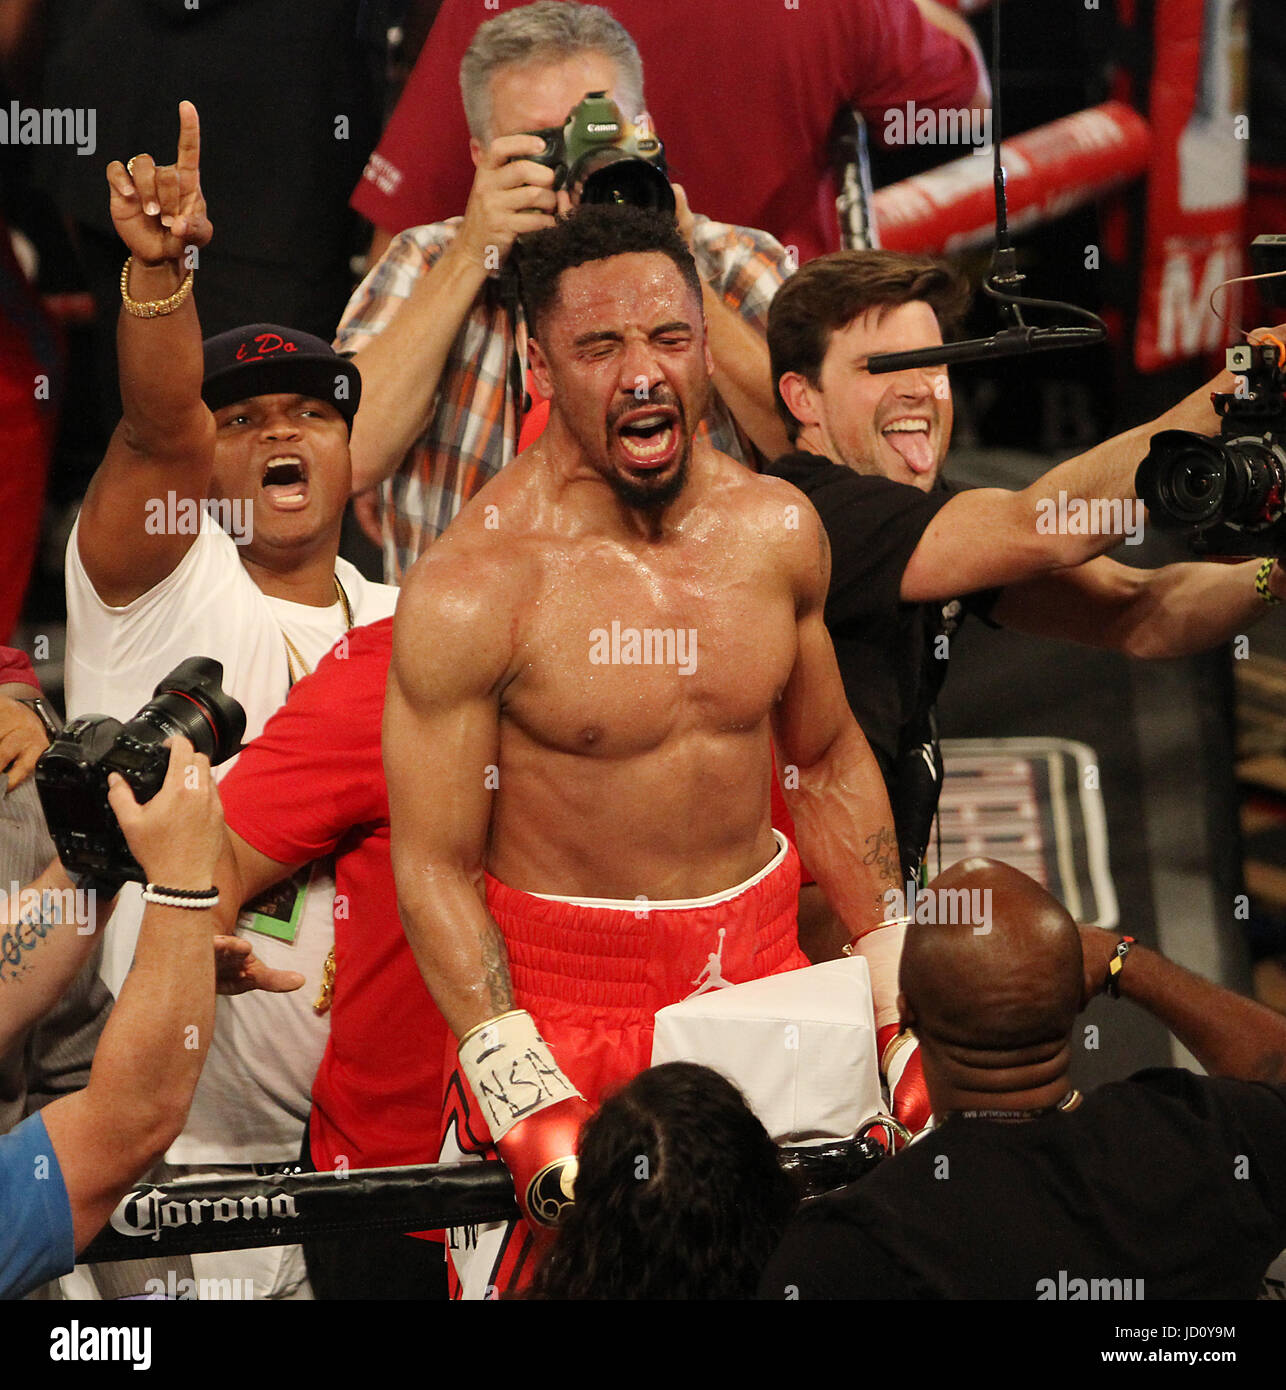 Las Vegas, Nevada, USA. 17th June, 2017. WBA, WBC and IBF Light Heavyweight  Boxing Champion Andre Ward celebrates after stopping challenger Sergey  Kovalev in the 8th round of their rematch on June